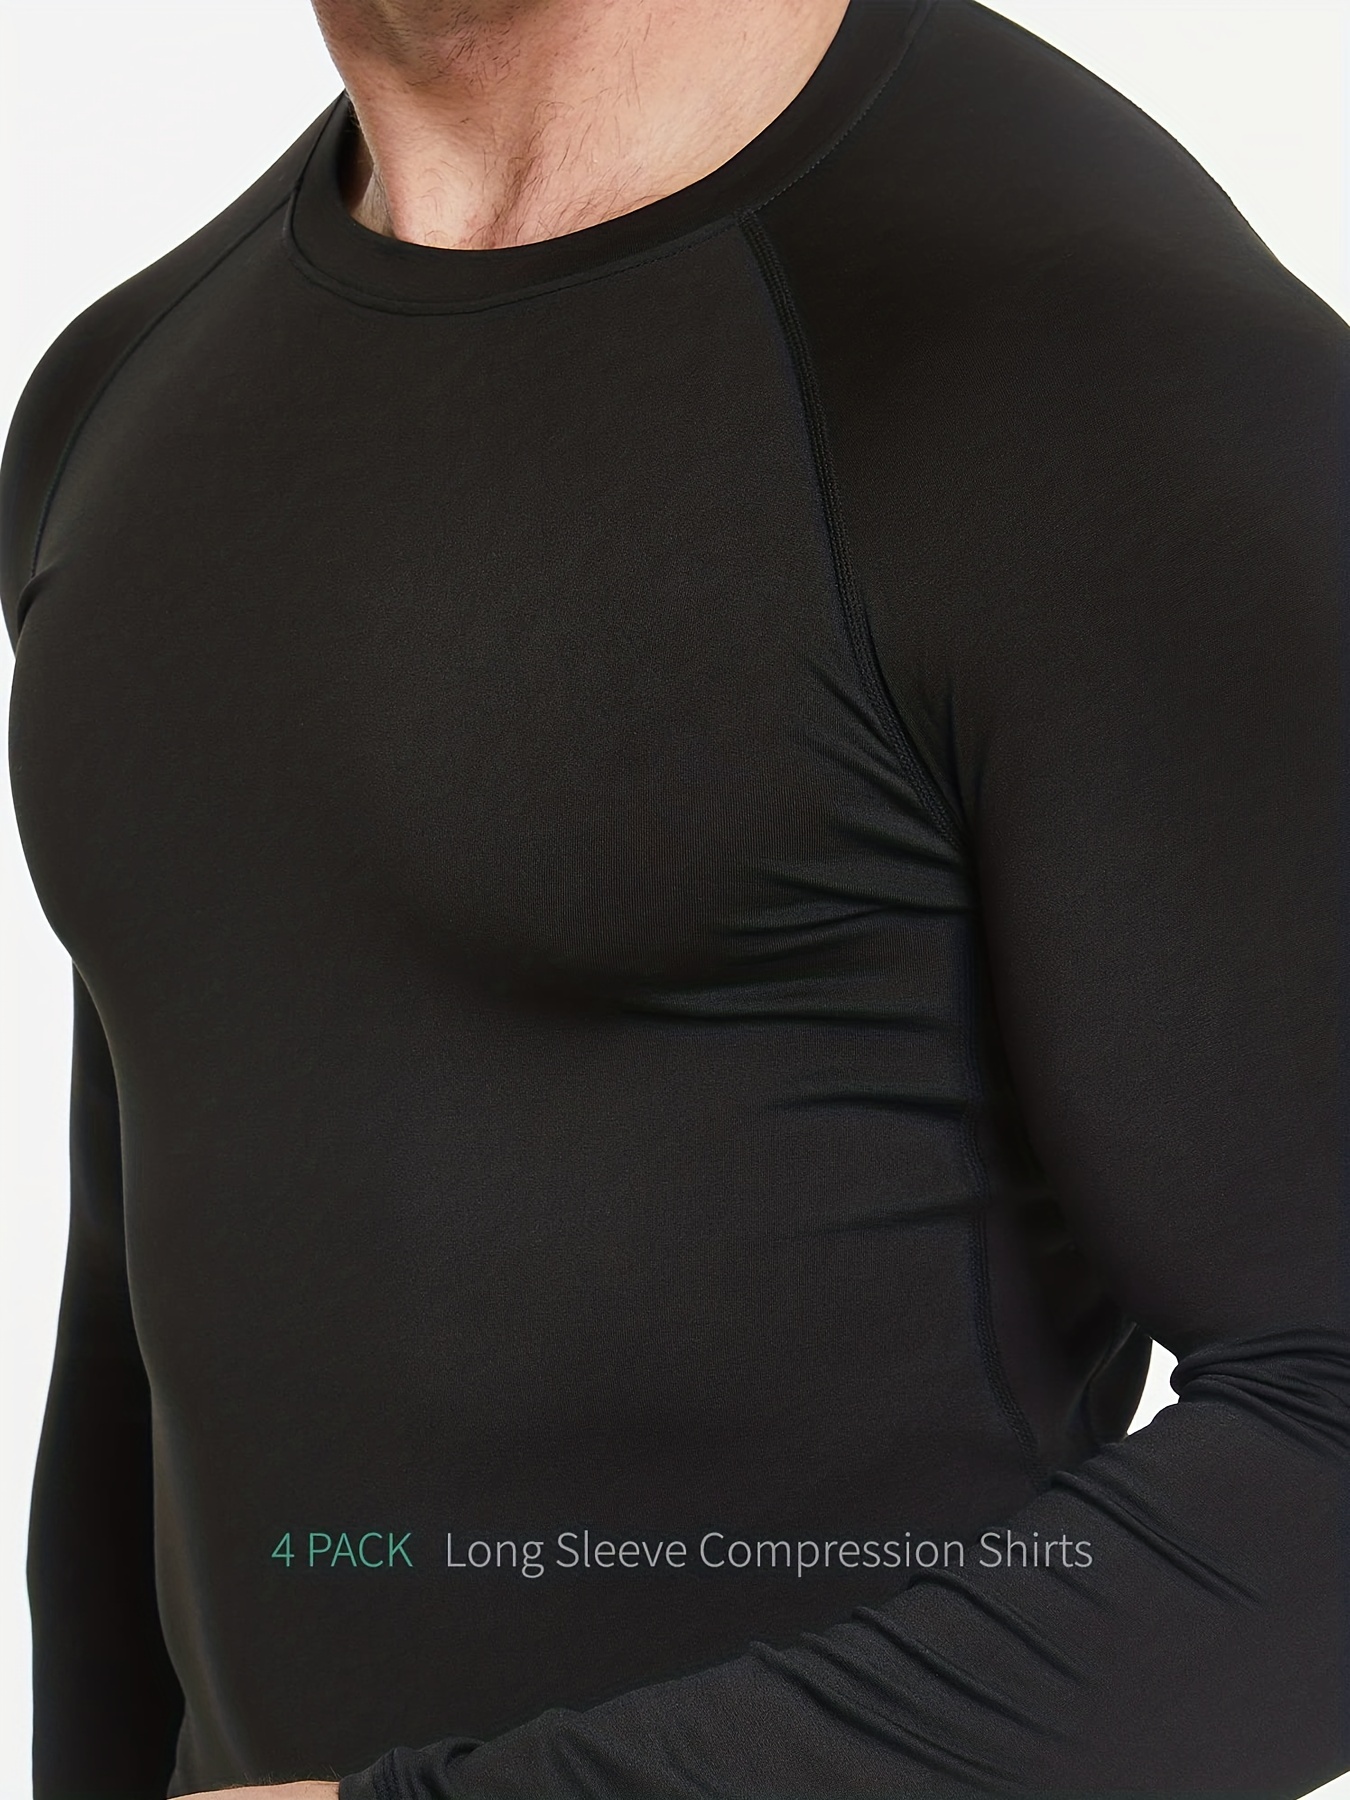  4 Pack Compression Shirts for Men Long Sleeve Athletic